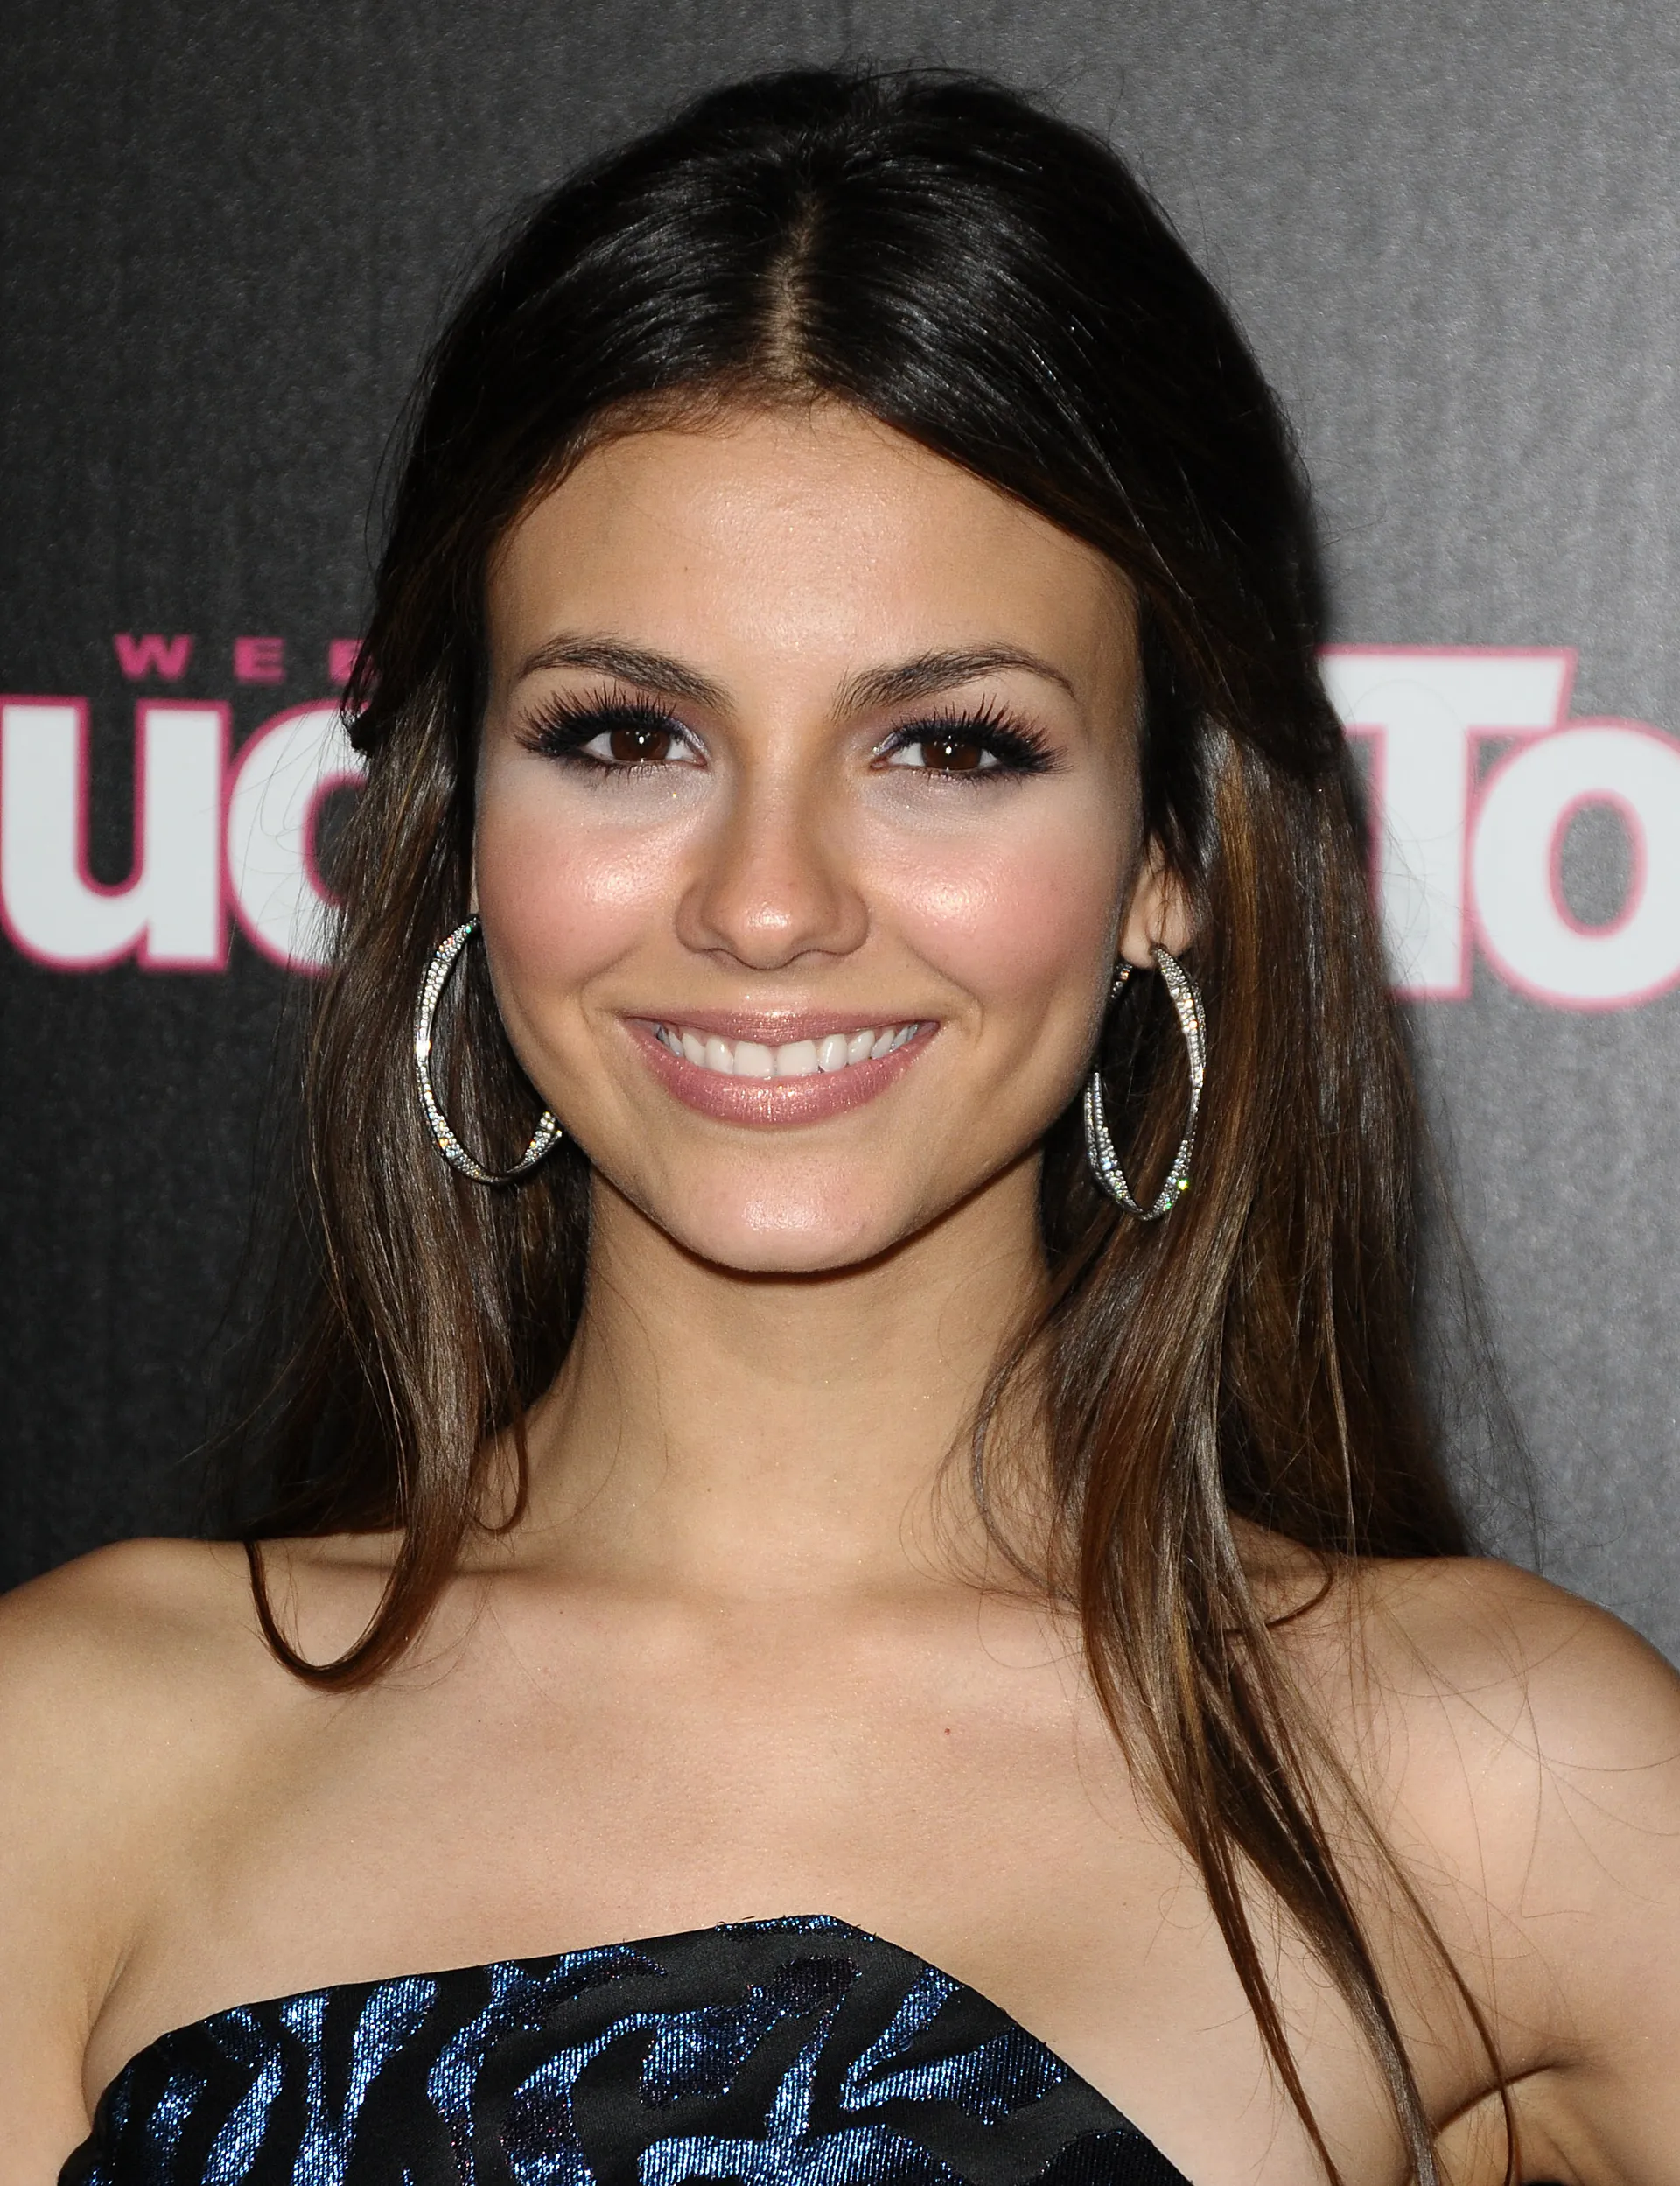 Gettyimages 106041483 Master 5 -Victoria Justice'S Beauty Evolution: From Tween Queen To Timeless Elegance